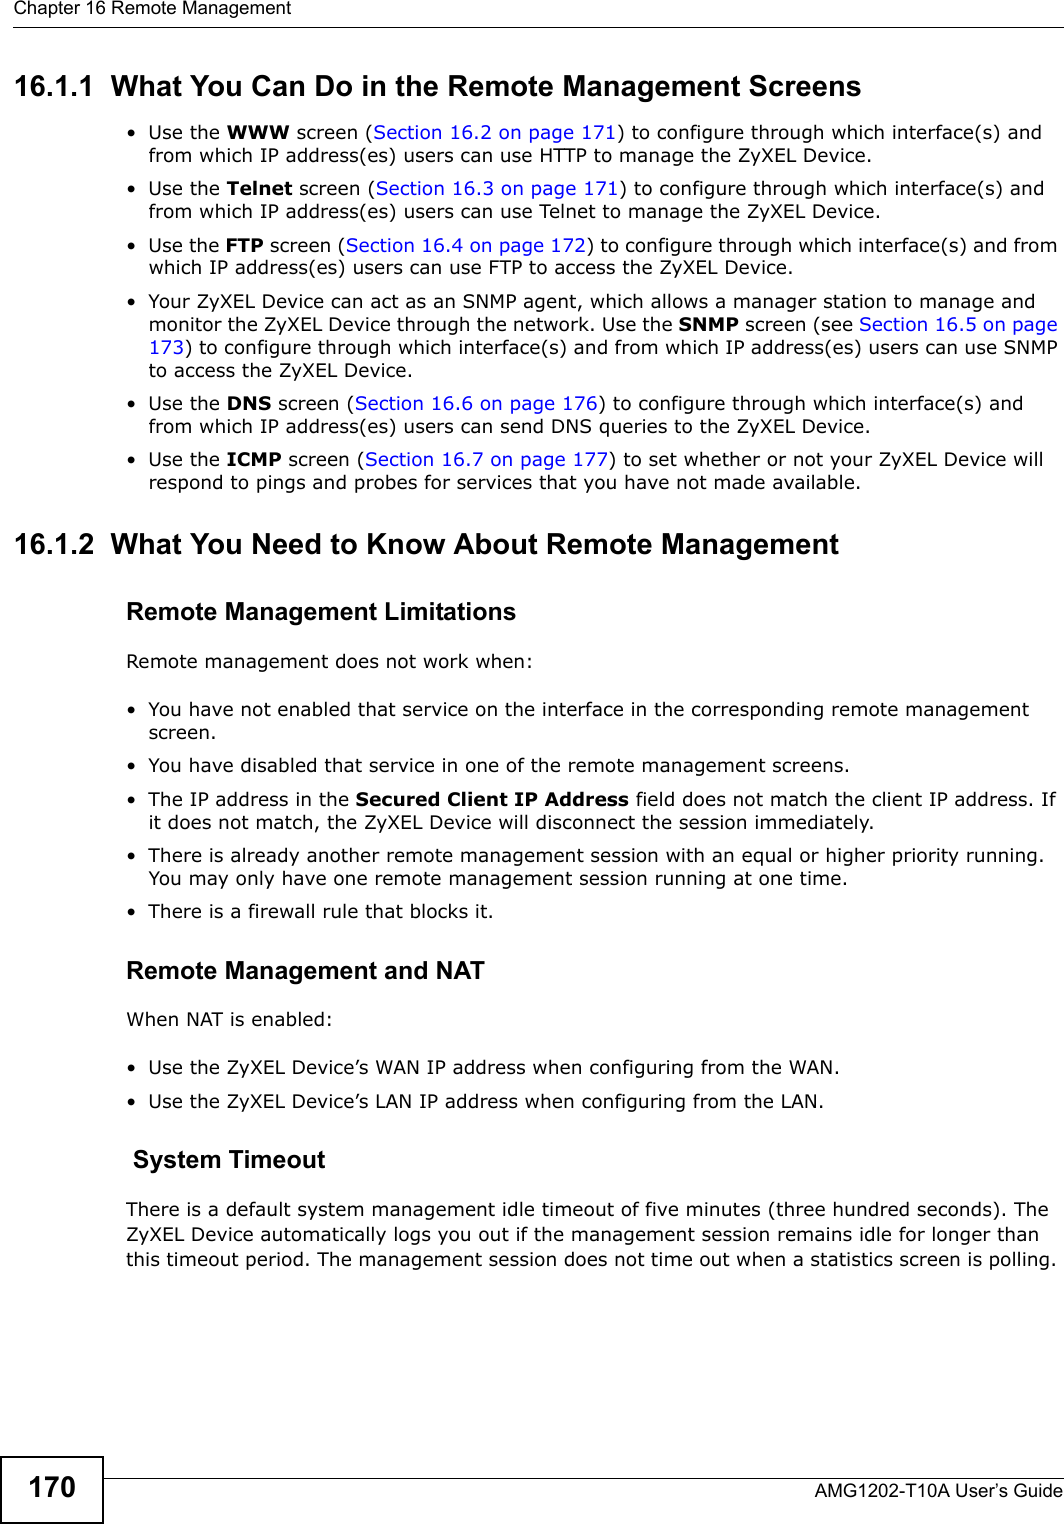 Chapter 16 Remote ManagementAMG1202-T10A User’s Guide17016.1.1  What You Can Do in the Remote Management Screens•Use the WWW screen (Section 16.2 on page 171) to configure through which interface(s) and from which IP address(es) users can use HTTP to manage the ZyXEL Device.•Use the Telnet screen (Section 16.3 on page 171) to configure through which interface(s) and from which IP address(es) users can use Telnet to manage the ZyXEL Device.•Use the FTP screen (Section 16.4 on page 172) to configure through which interface(s) and from which IP address(es) users can use FTP to access the ZyXEL Device.• Your ZyXEL Device can act as an SNMP agent, which allows a manager station to manage and monitor the ZyXEL Device through the network. Use the SNMP screen (see Section 16.5 on page 173) to configure through which interface(s) and from which IP address(es) users can use SNMP to access the ZyXEL Device.•Use the DNS screen (Section 16.6 on page 176) to configure through which interface(s) and from which IP address(es) users can send DNS queries to the ZyXEL Device.•Use the ICMP screen (Section 16.7 on page 177) to set whether or not your ZyXEL Device will respond to pings and probes for services that you have not made available.16.1.2  What You Need to Know About Remote ManagementRemote Management LimitationsRemote management does not work when:• You have not enabled that service on the interface in the corresponding remote management screen.• You have disabled that service in one of the remote management screens.• The IP address in the Secured Client IP Address field does not match the client IP address. If it does not match, the ZyXEL Device will disconnect the session immediately.• There is already another remote management session with an equal or higher priority running. You may only have one remote management session running at one time.• There is a firewall rule that blocks it.Remote Management and NATWhen NAT is enabled:• Use the ZyXEL Device’s WAN IP address when configuring from the WAN. • Use the ZyXEL Device’s LAN IP address when configuring from the LAN. System TimeoutThere is a default system management idle timeout of five minutes (three hundred seconds). The ZyXEL Device automatically logs you out if the management session remains idle for longer than this timeout period. The management session does not time out when a statistics screen is polling. 